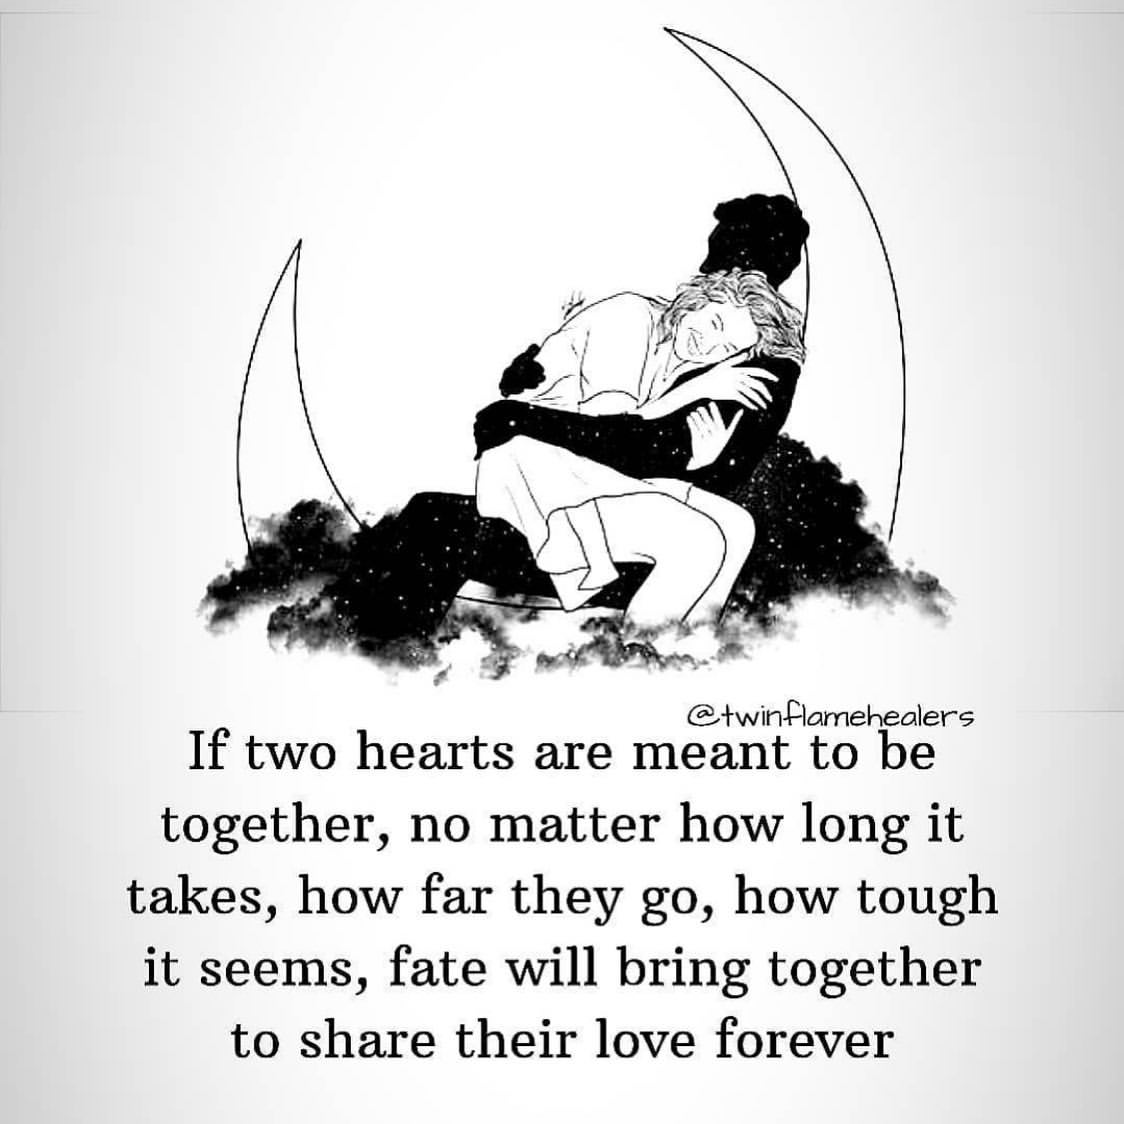 If two hearts are meant to be together, no matter how long it takes, how far they go, how tough it seems, fate will bring together to share their love forever.